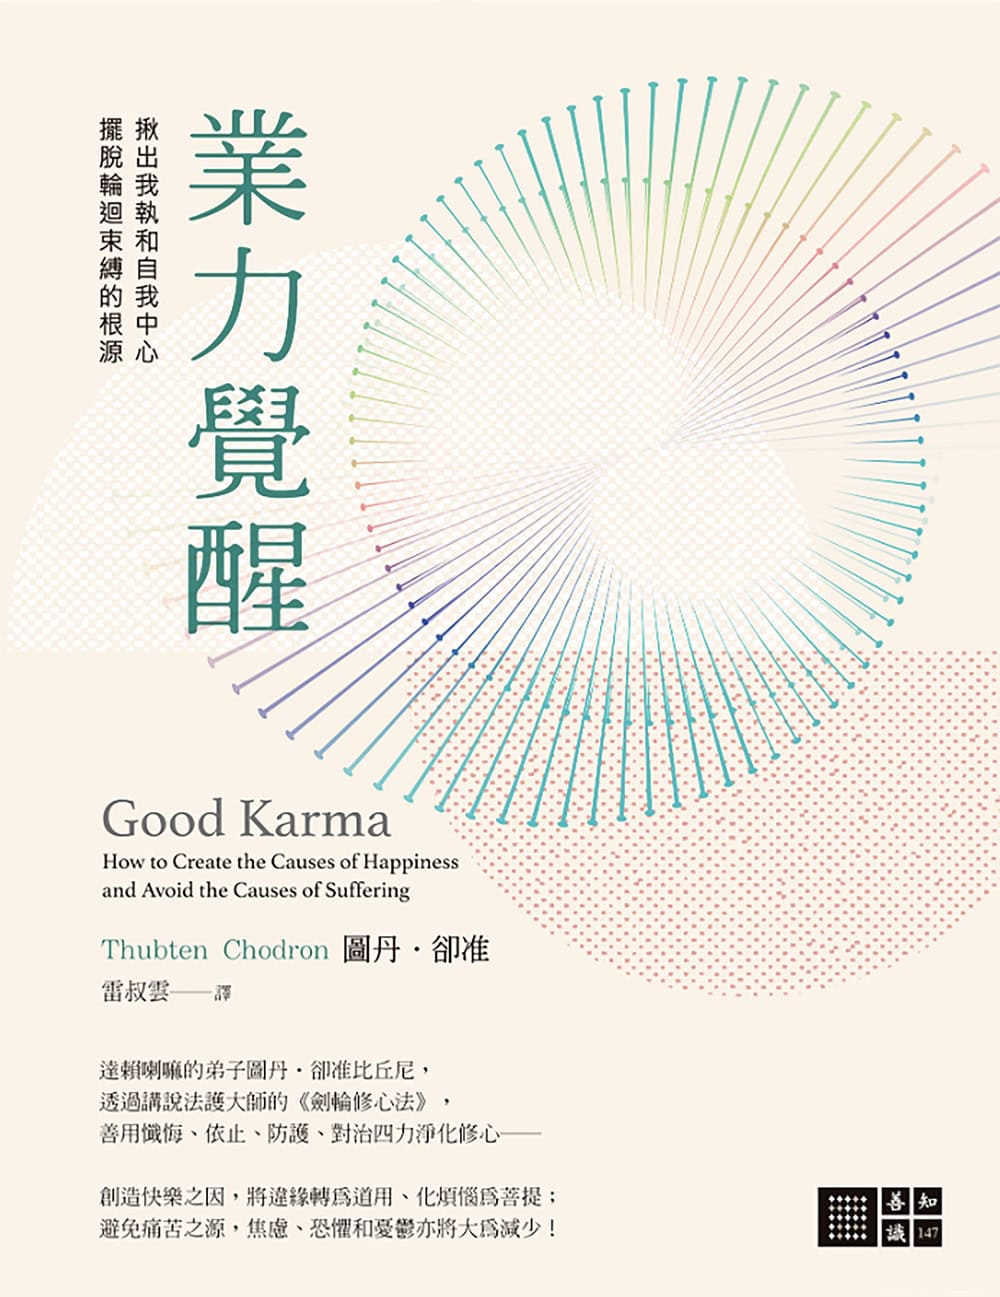 Cover of Chinese translation of "Good Karma"